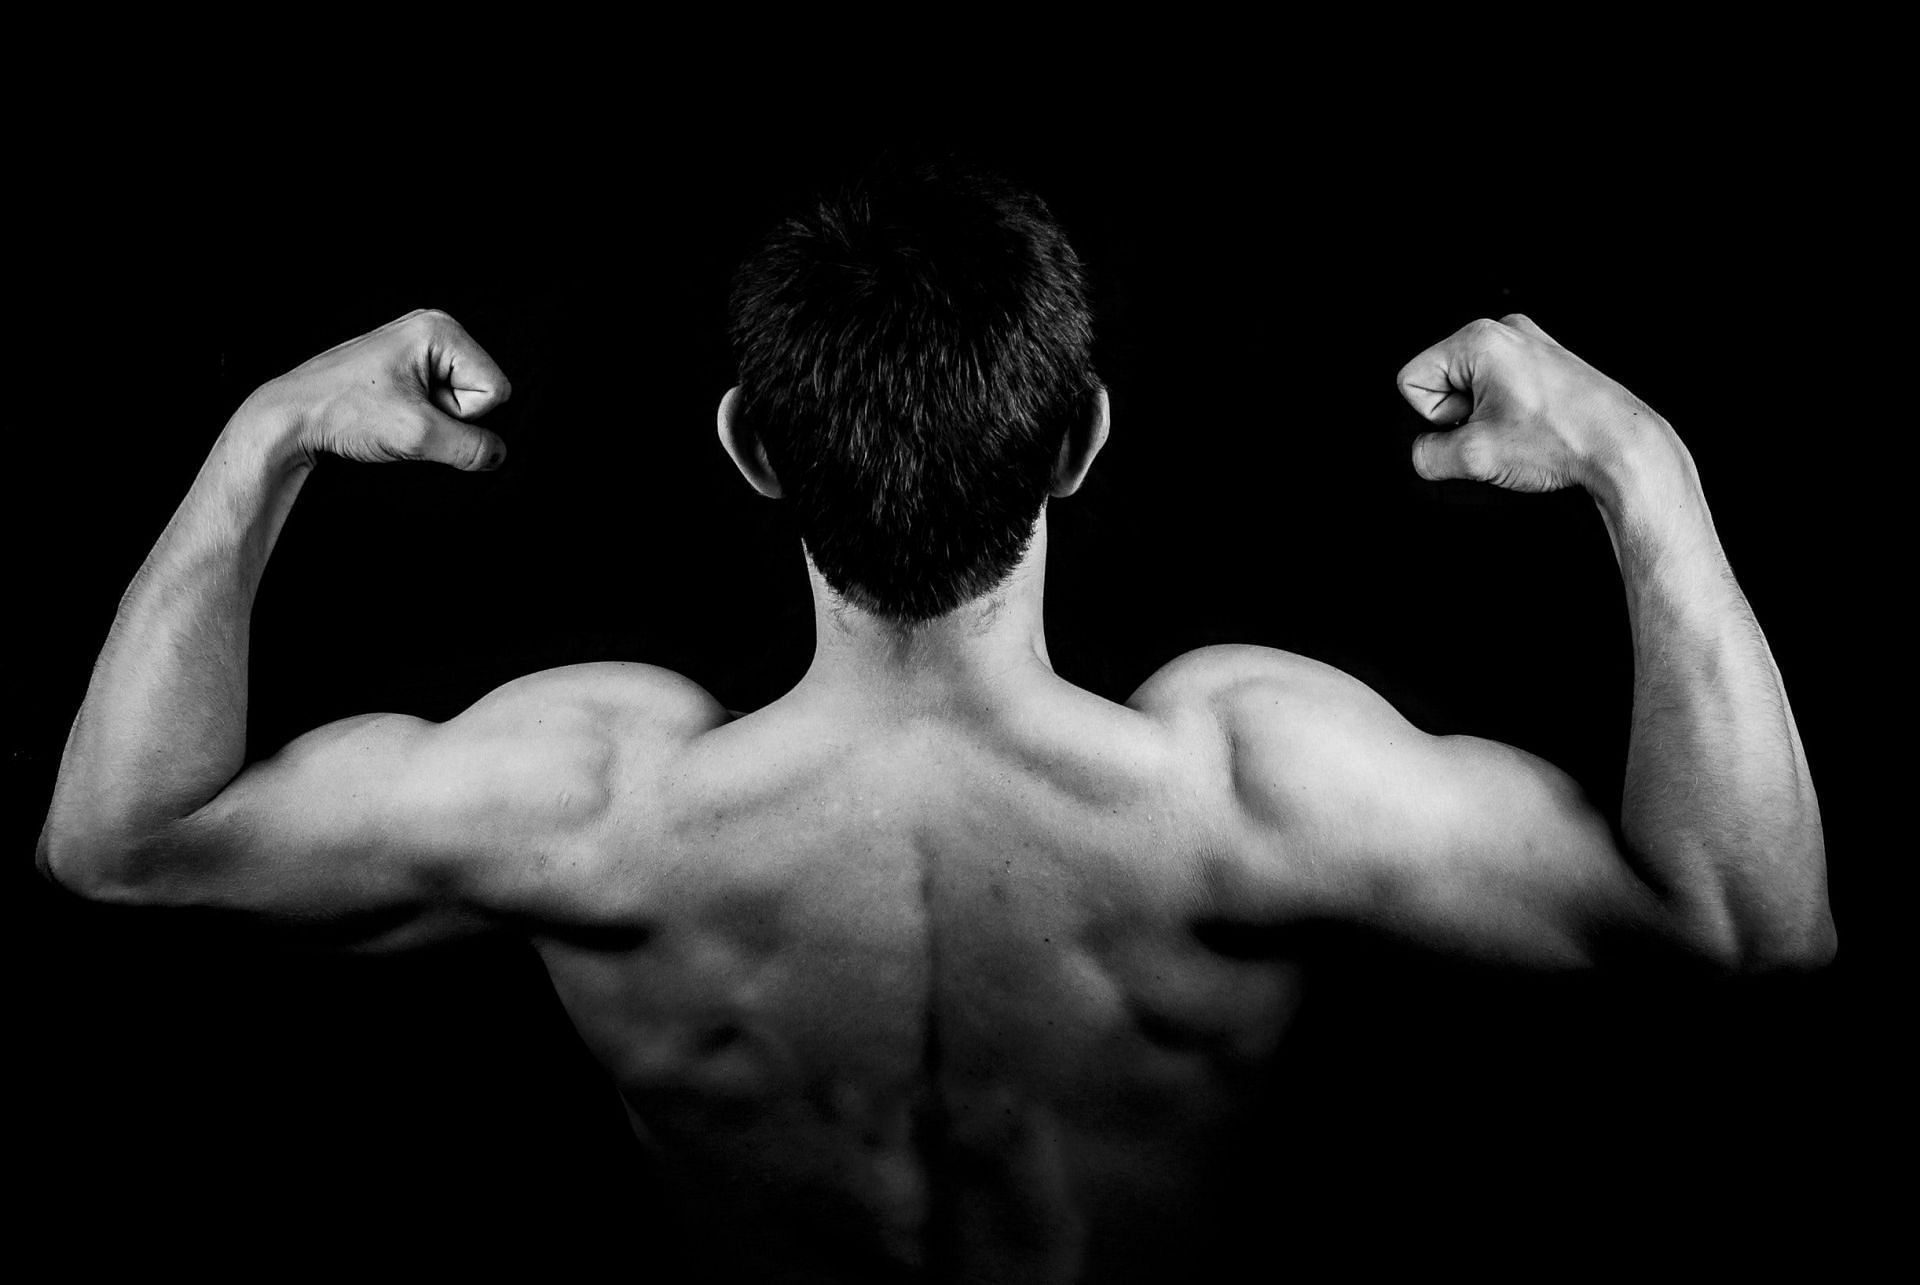 Upper-body muscles are important for lifting and carrying strength (Image via Pexels @Pixabay)